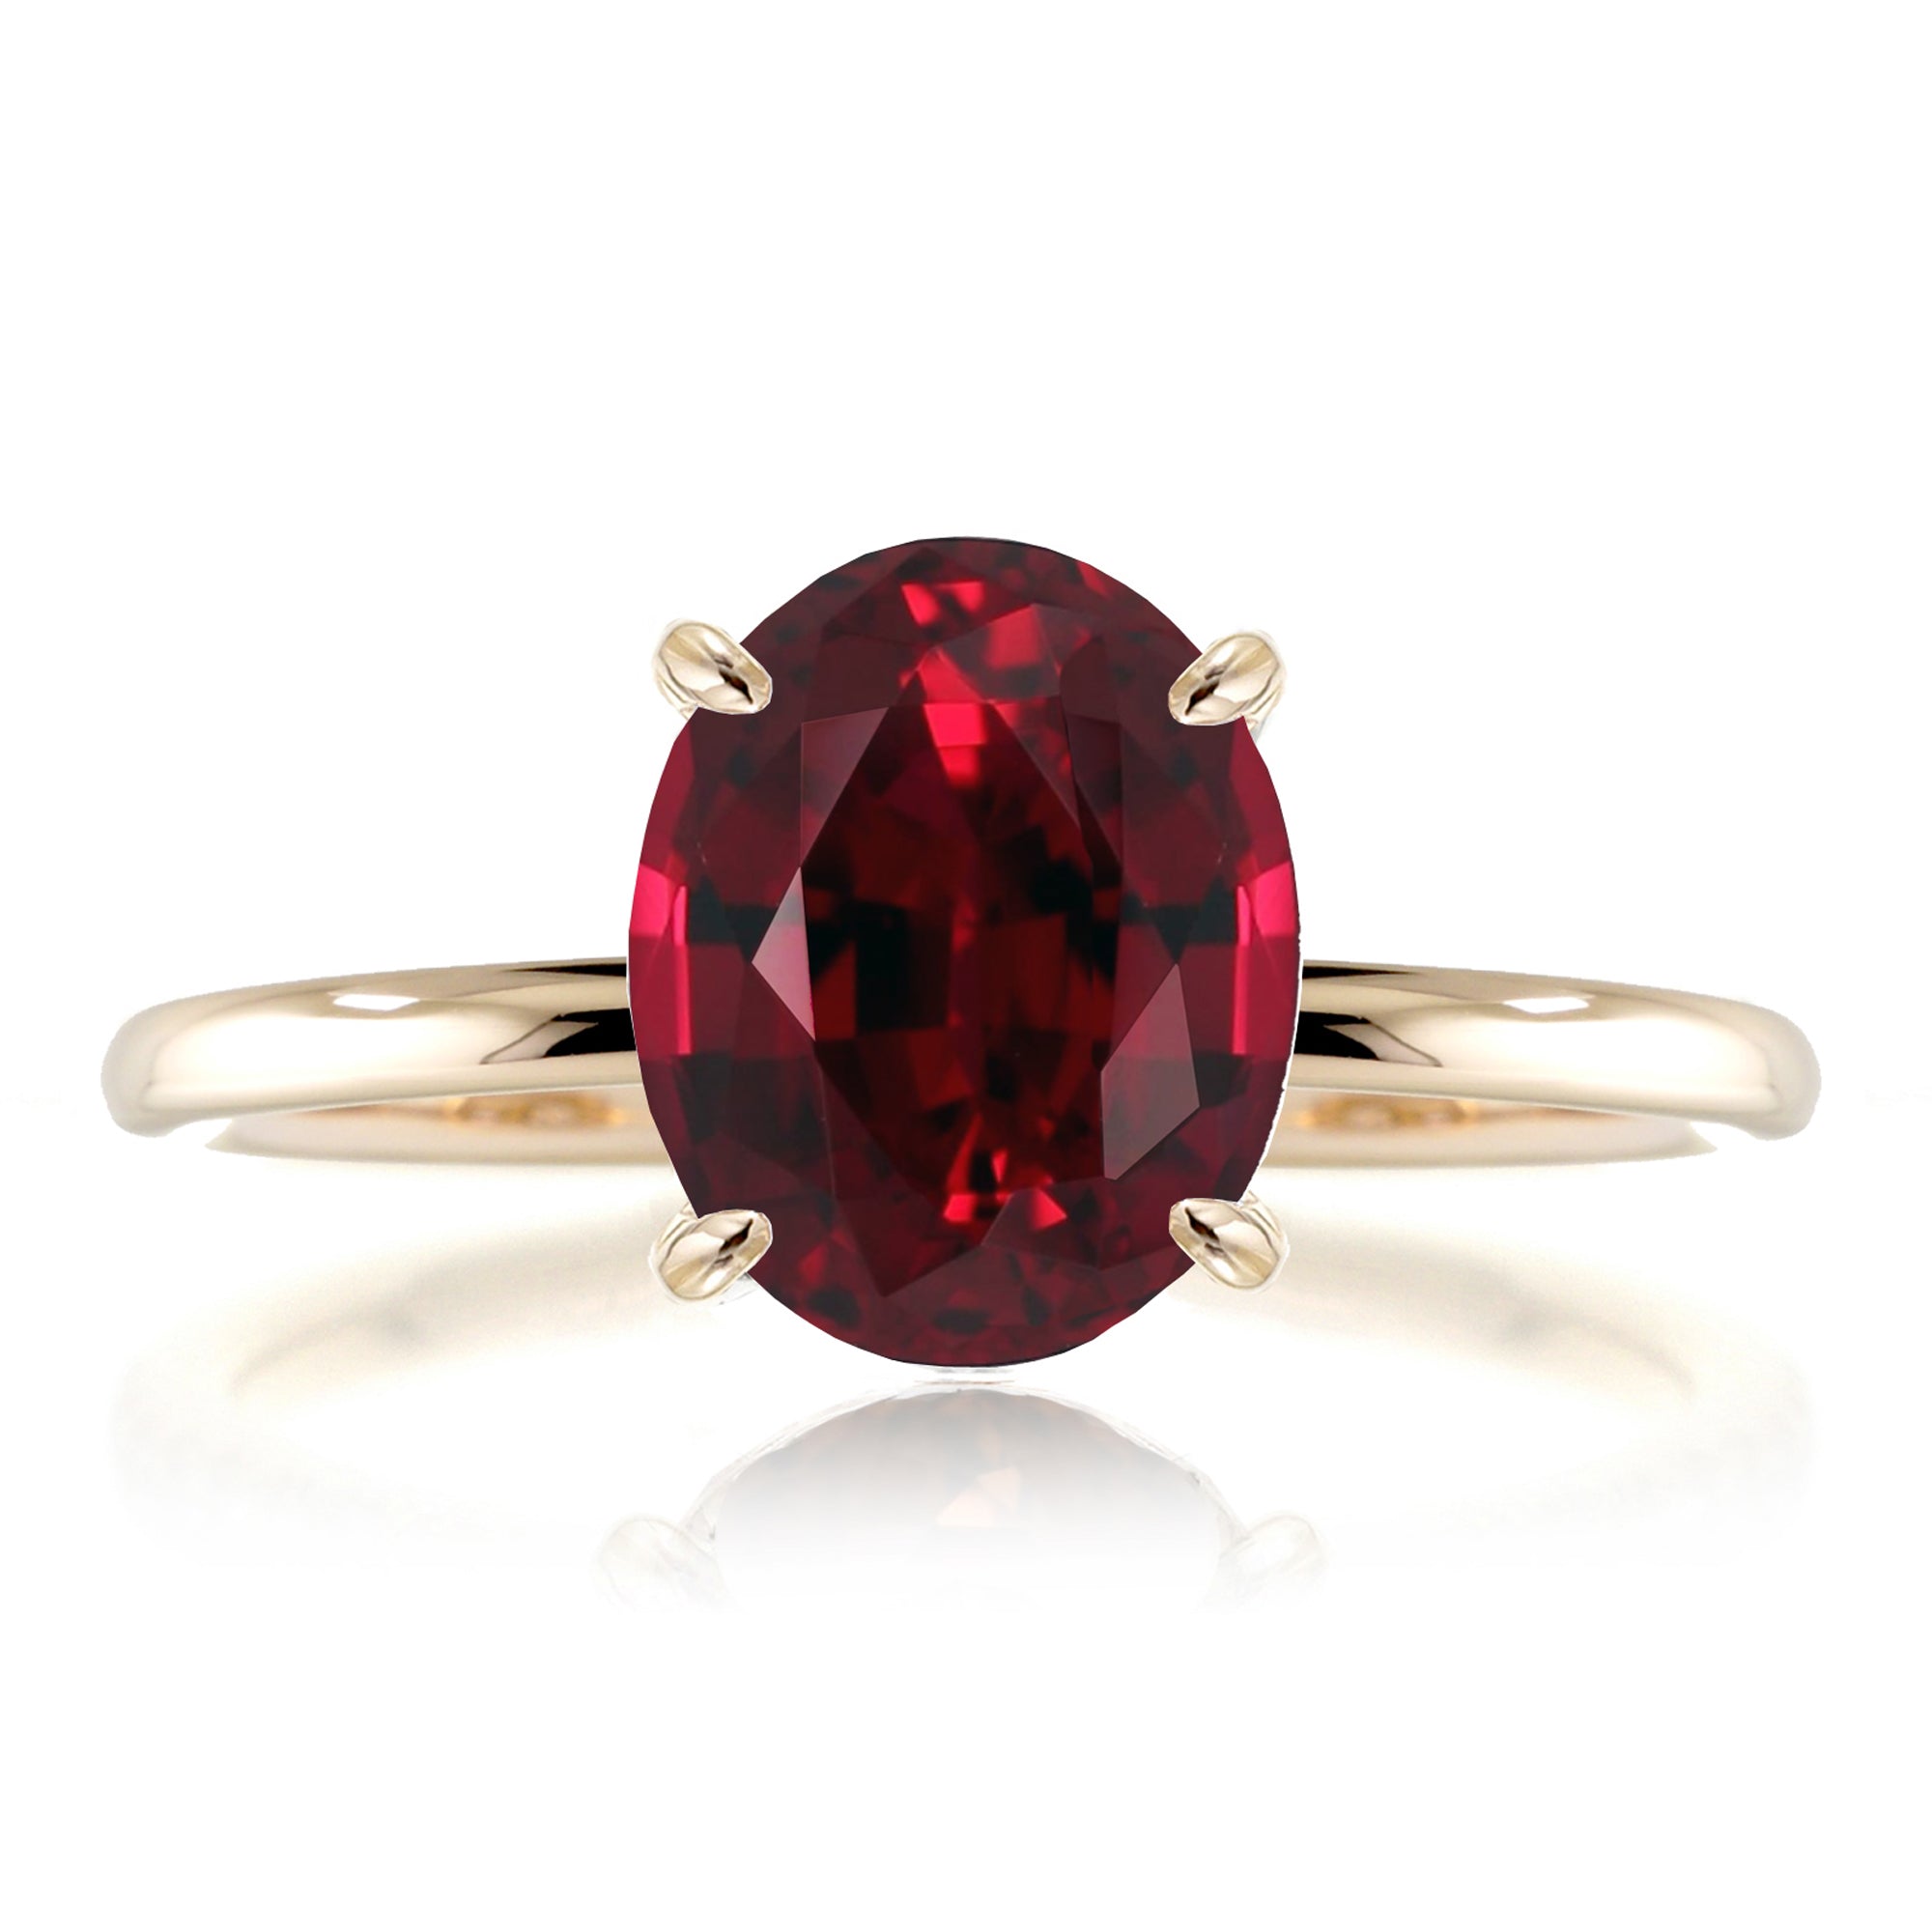 Oval lab-grown ruby solid band engagement ring yellow gold - the Ava